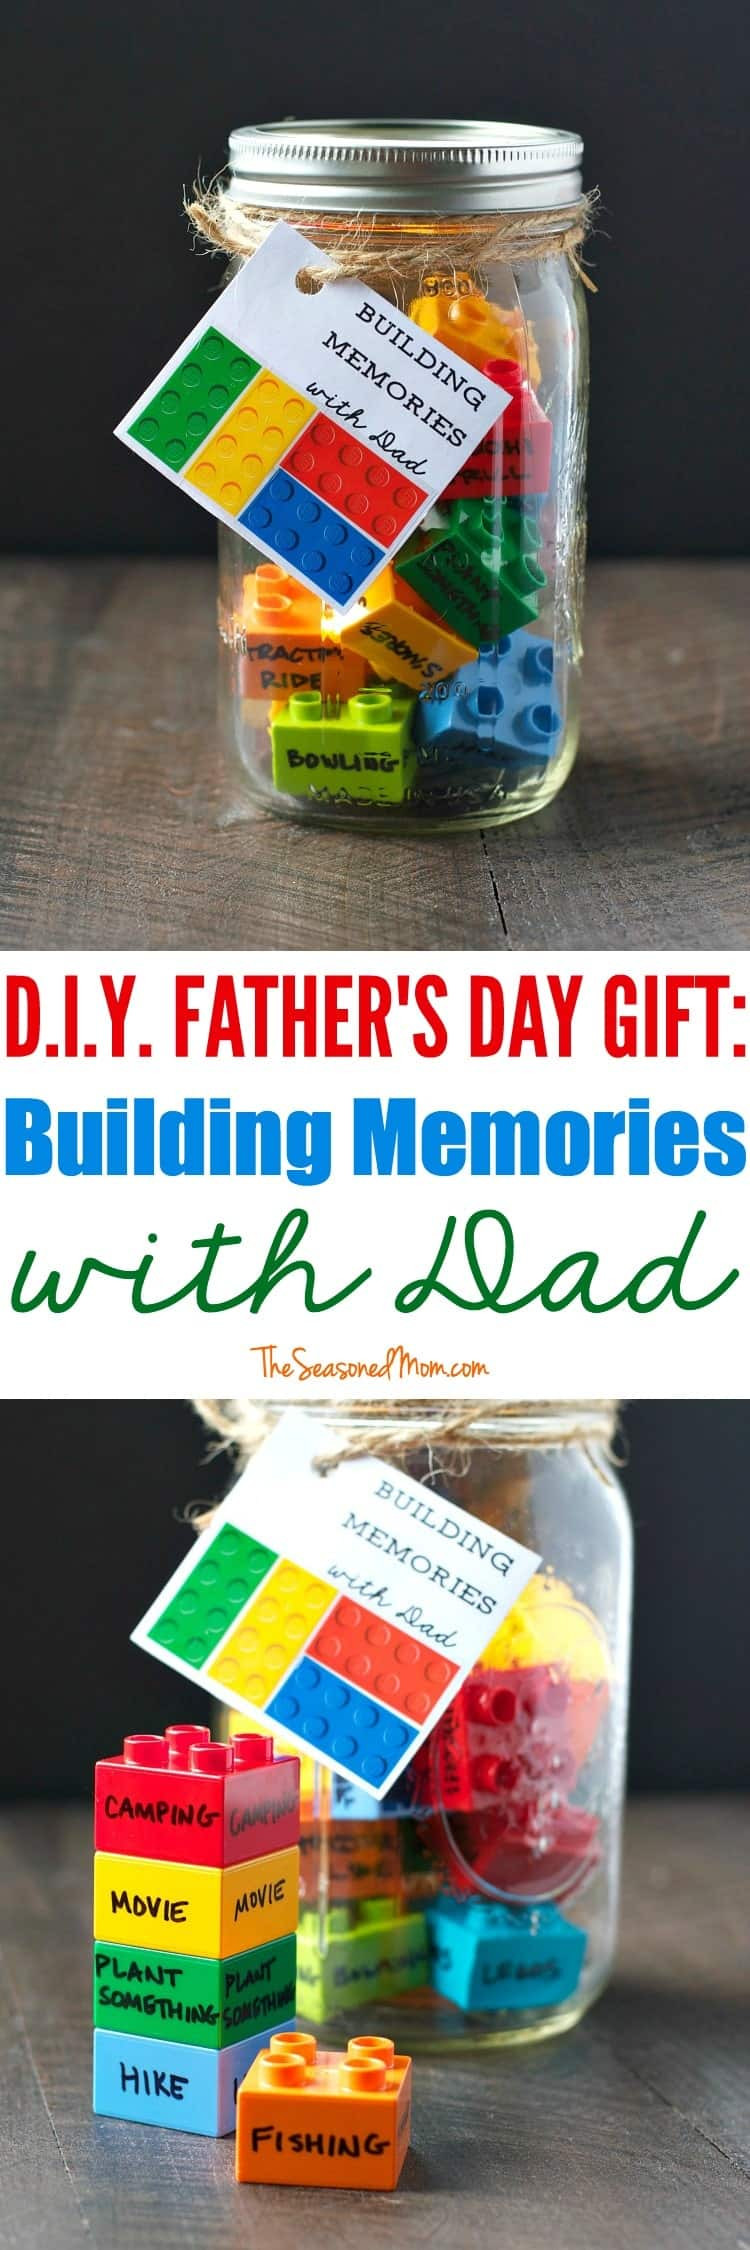 Diy Fathers Day Gift
 DIY Father s Day Gift Building Memories with Dad The